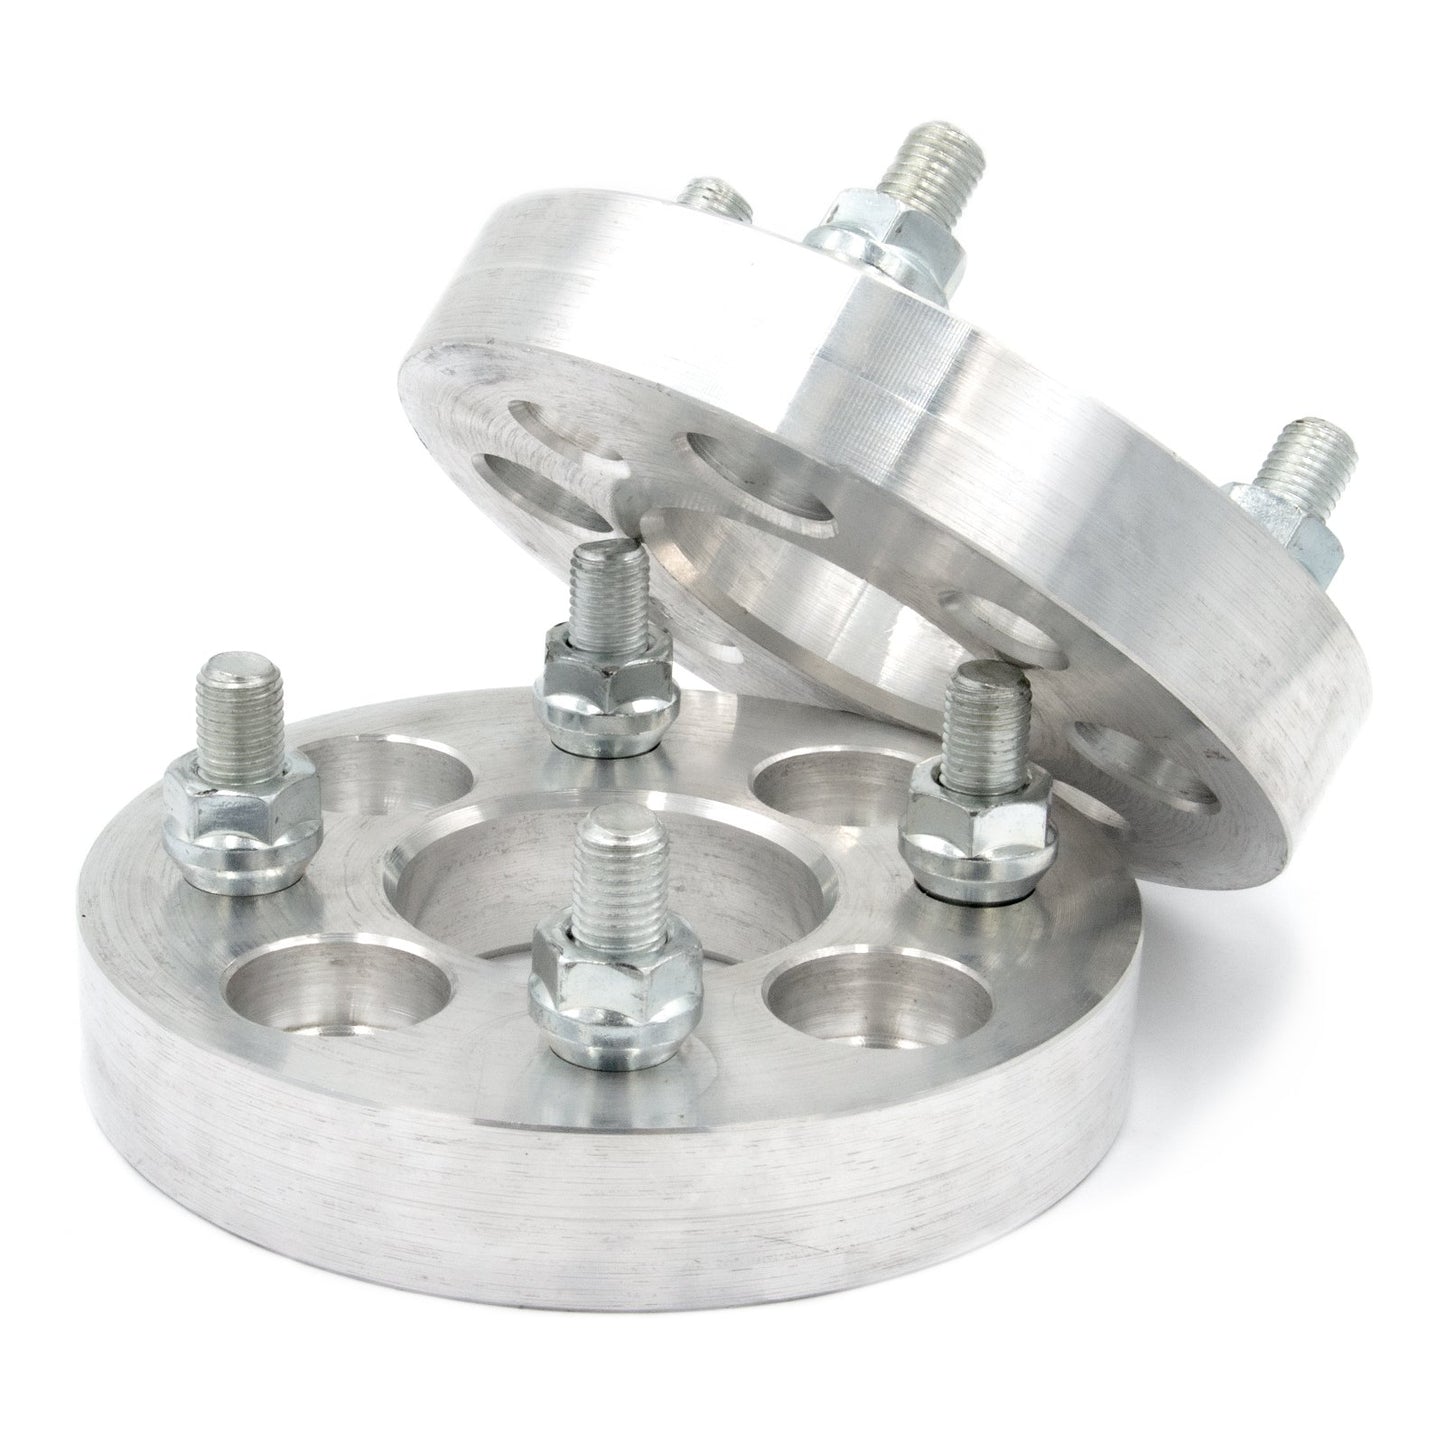 4x100 to 4x110 Wheel Spacer/Adapter - Thickness: 3/4"- 4"